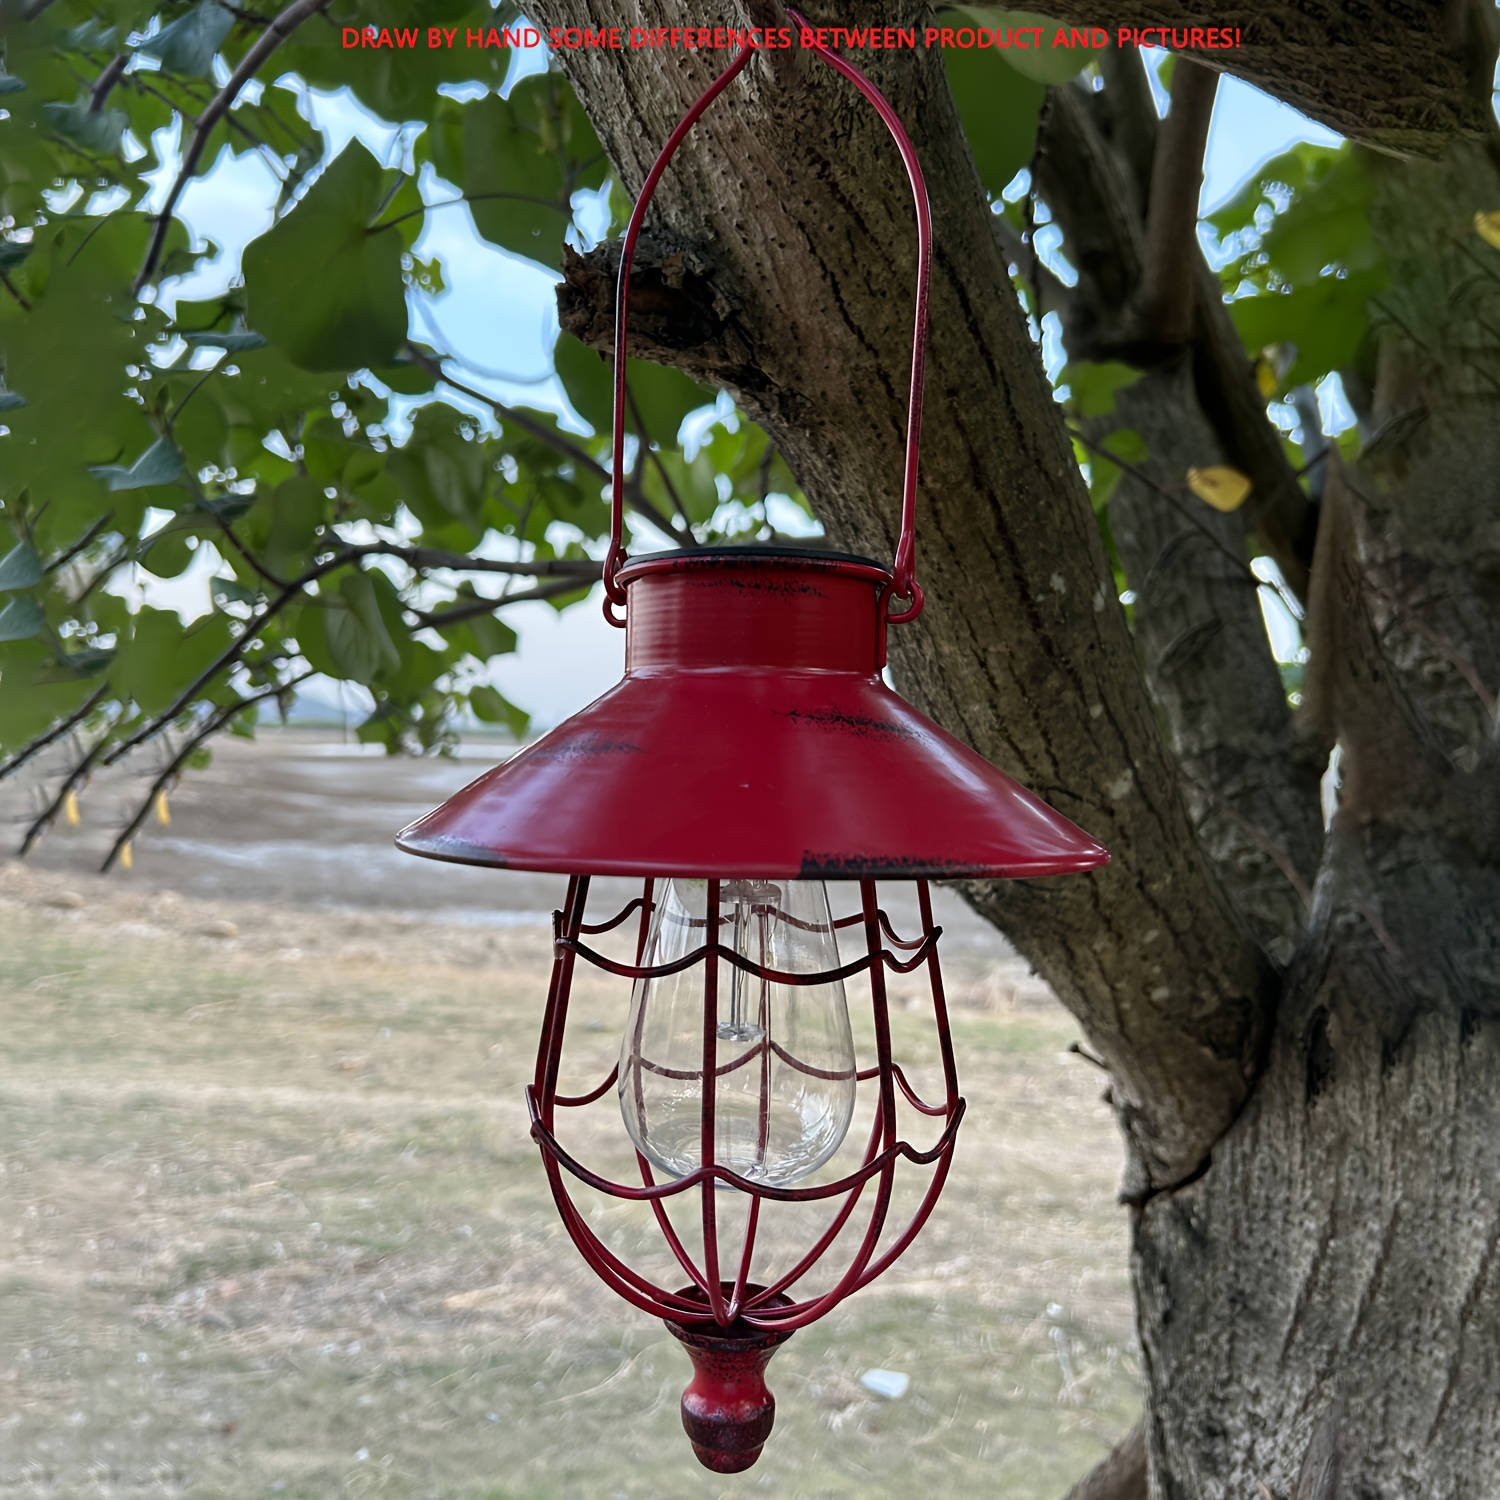 

1pc Solar-powered Metal Lantern, Vintage Hollow-out Design, Red/green Outdoor Garden Light, Porch And Yard Decor With Hanging Hook